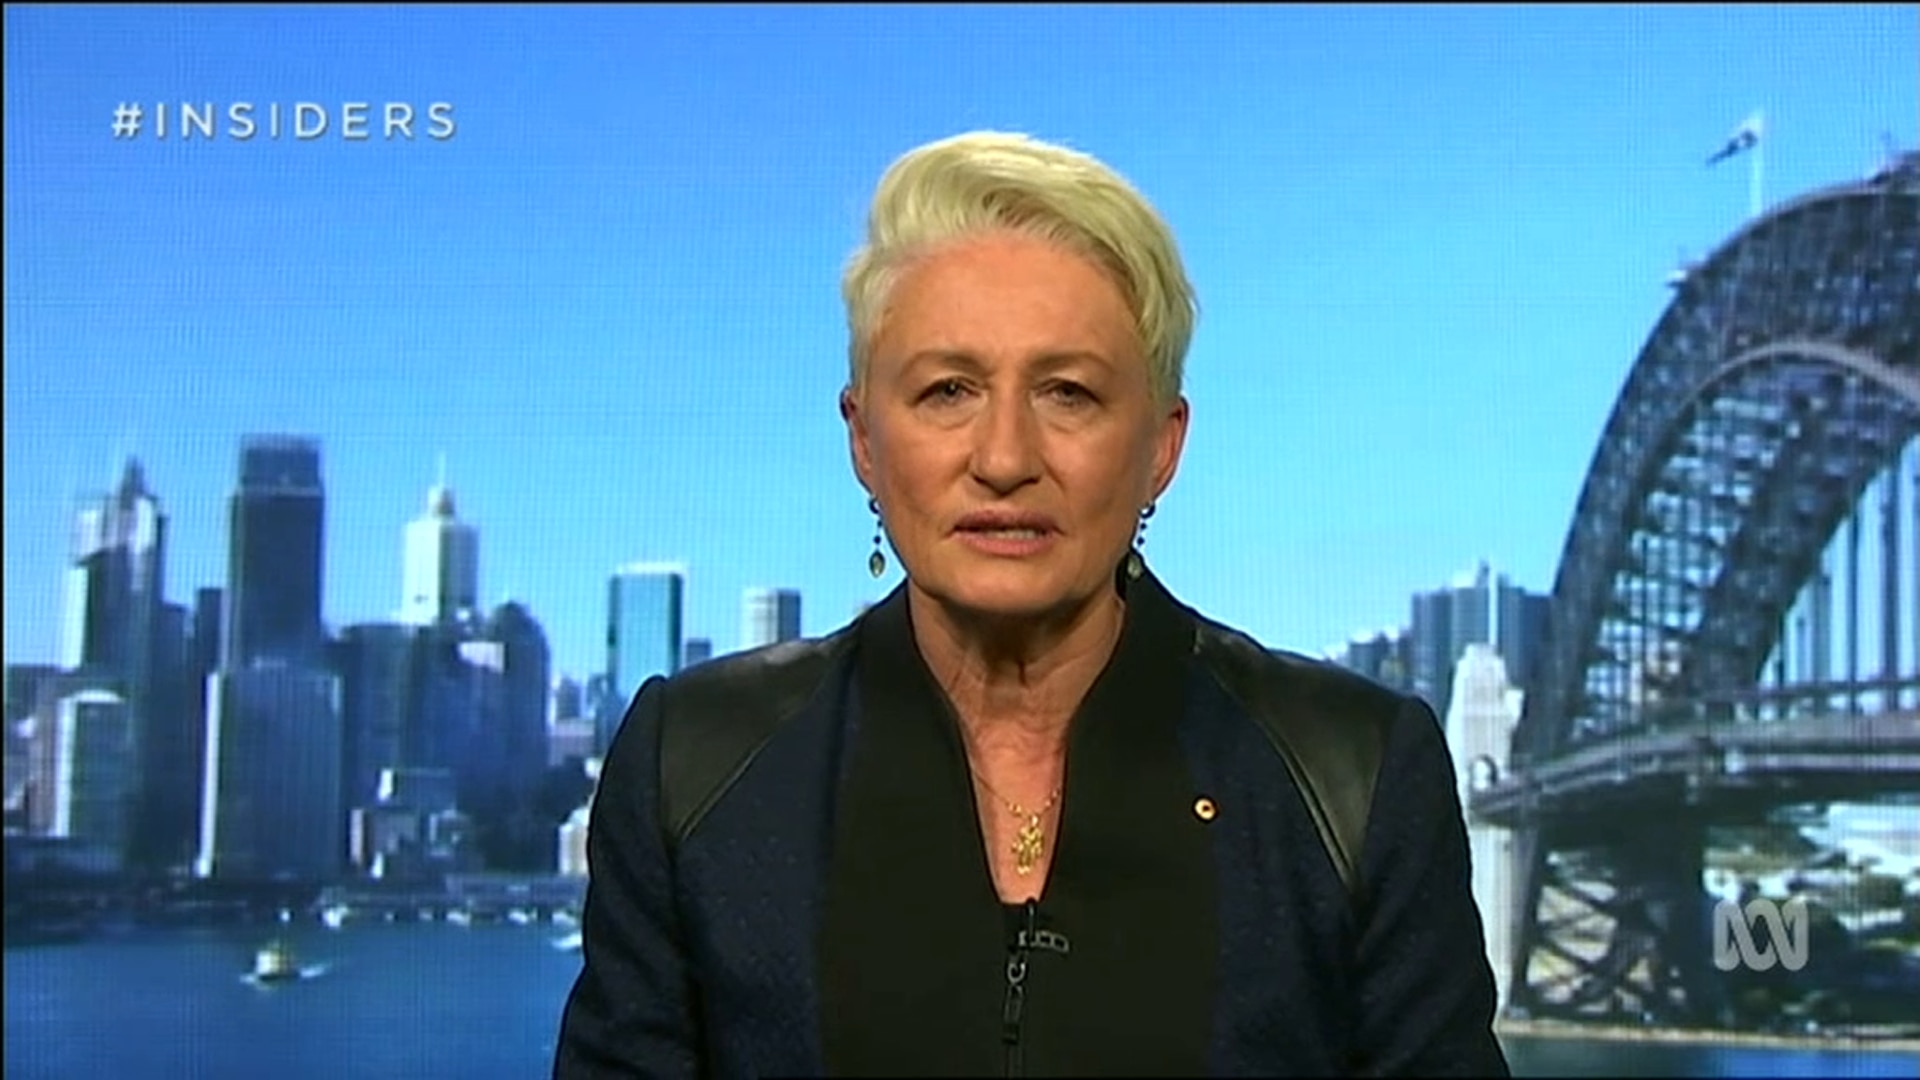 'This is a great moment for Australian democracy,' Dr Kerryn Phelps said in her victory speech.